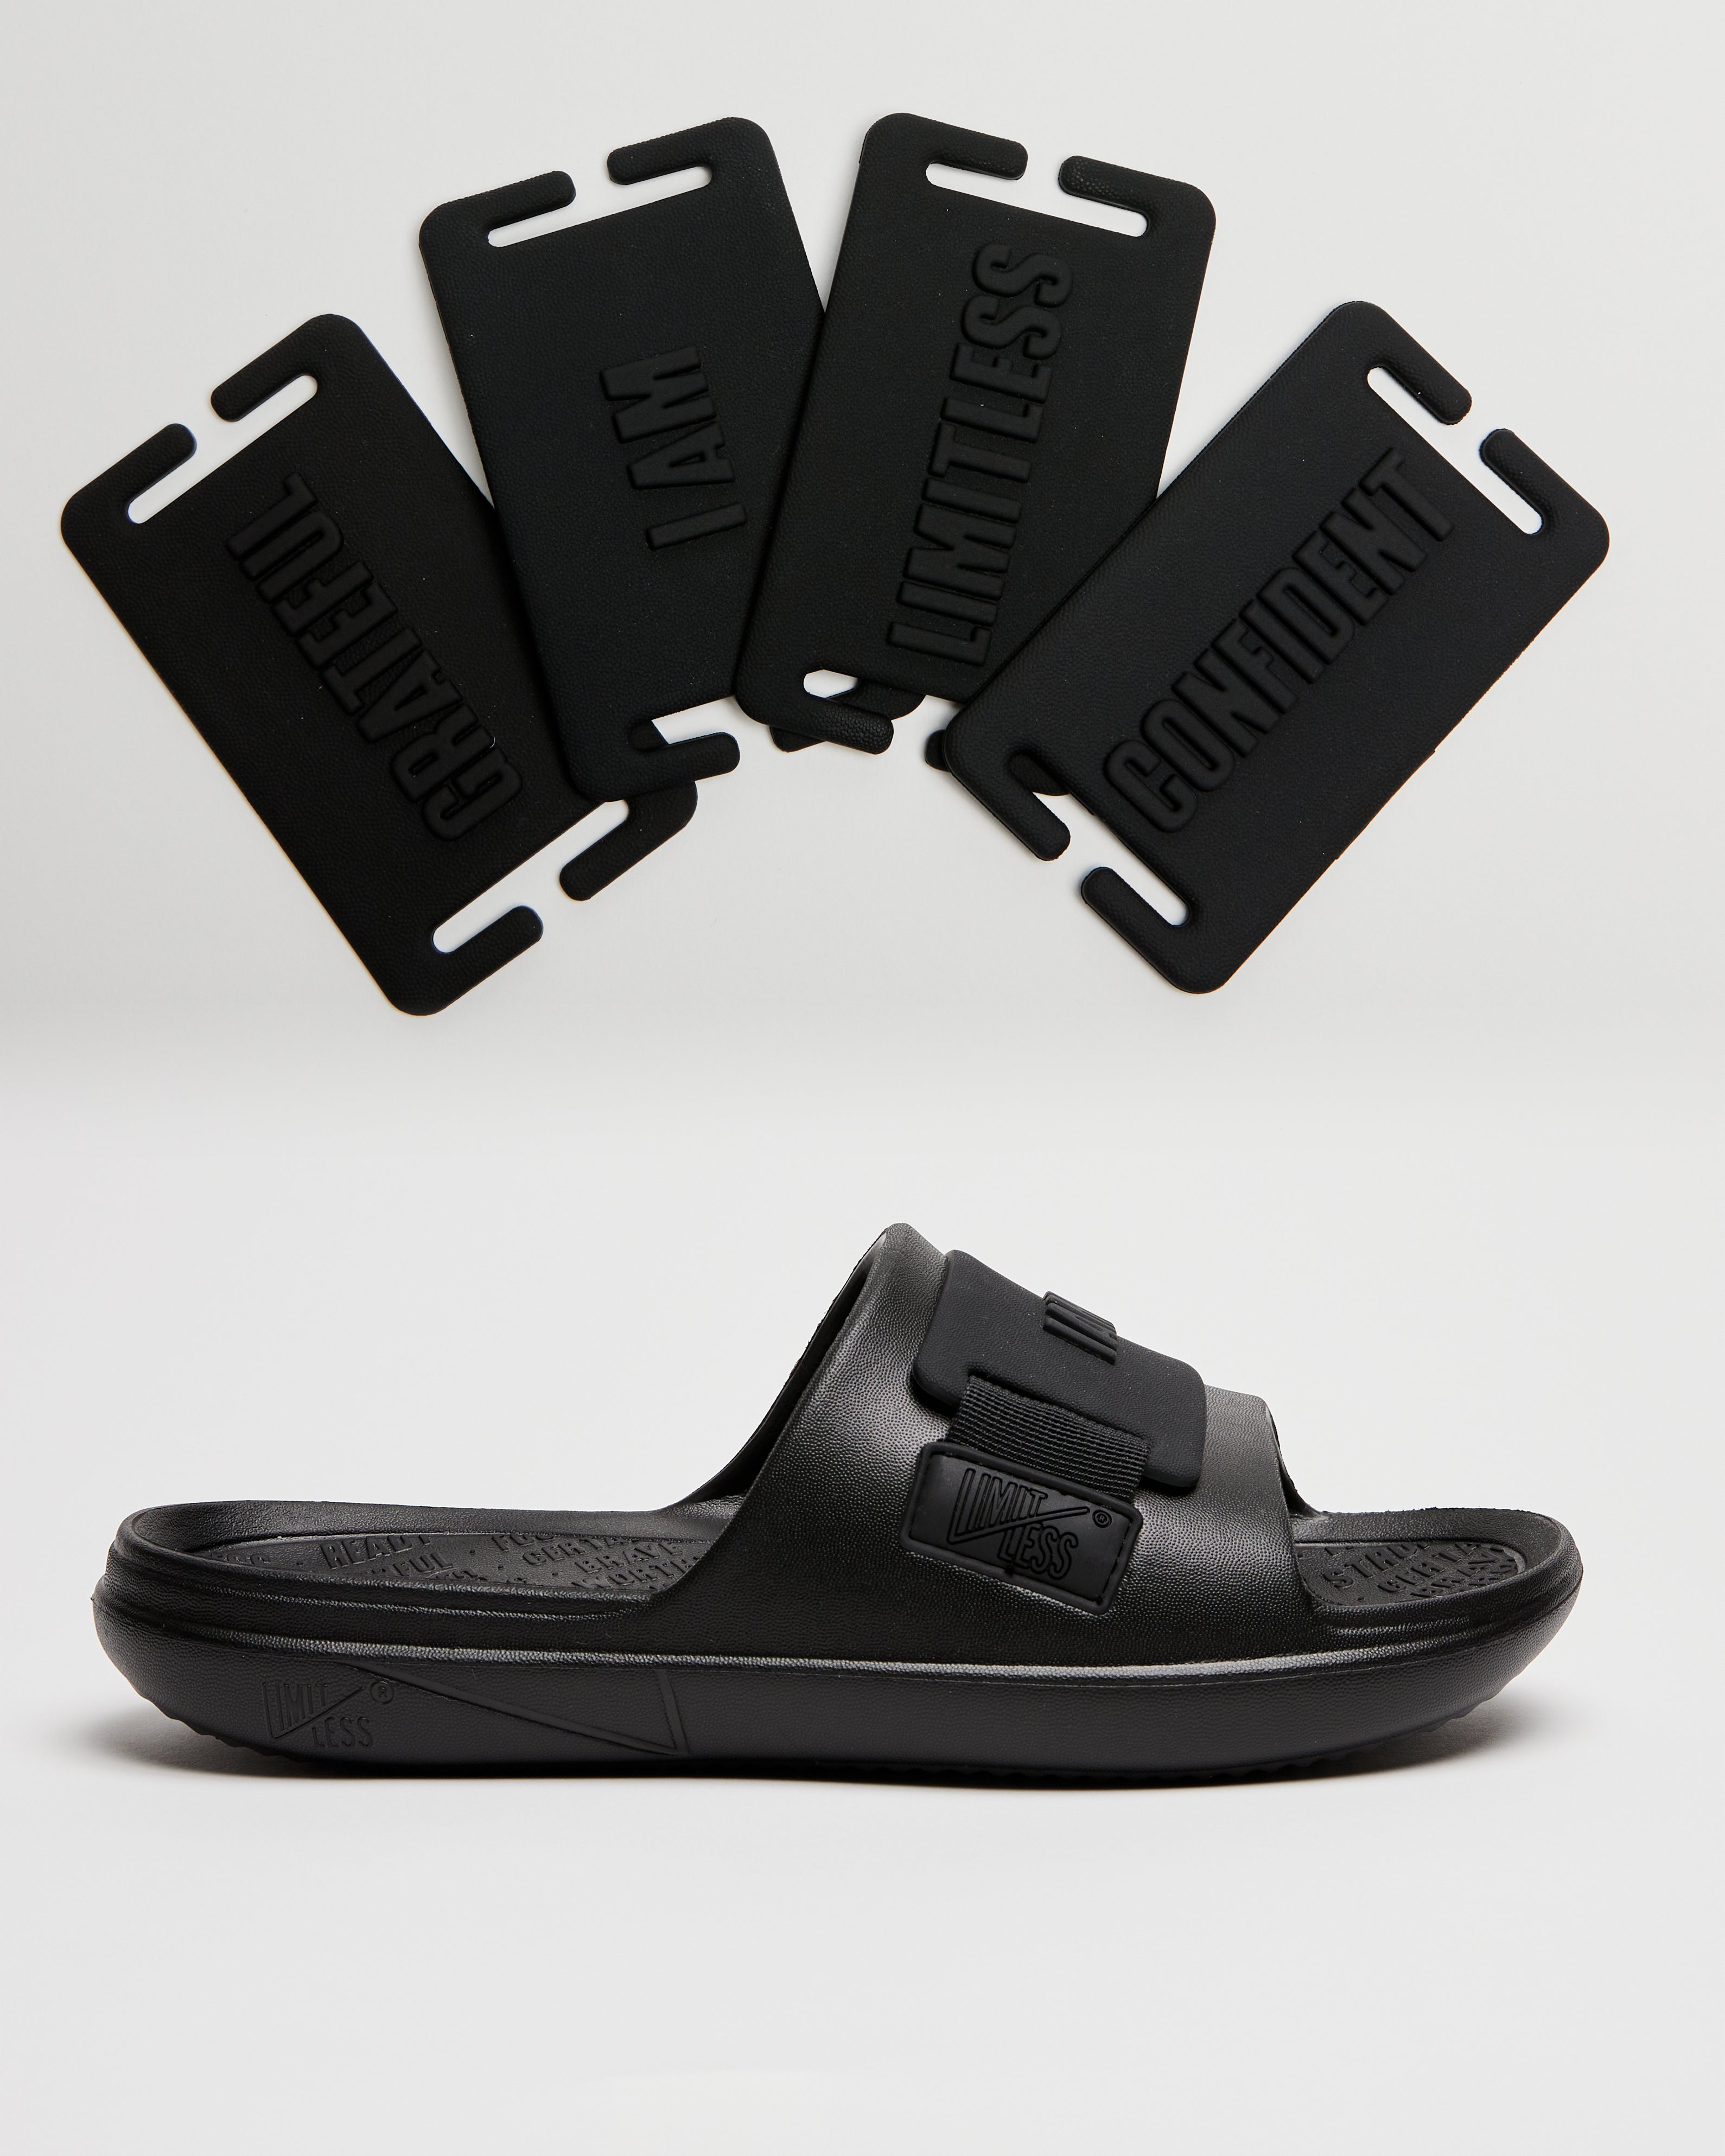 LIMITLESS SLIDES™ WITH ESSENTIAL TIBAH™ QUAD - MUSTANG HIGH SCHOOL EDITION